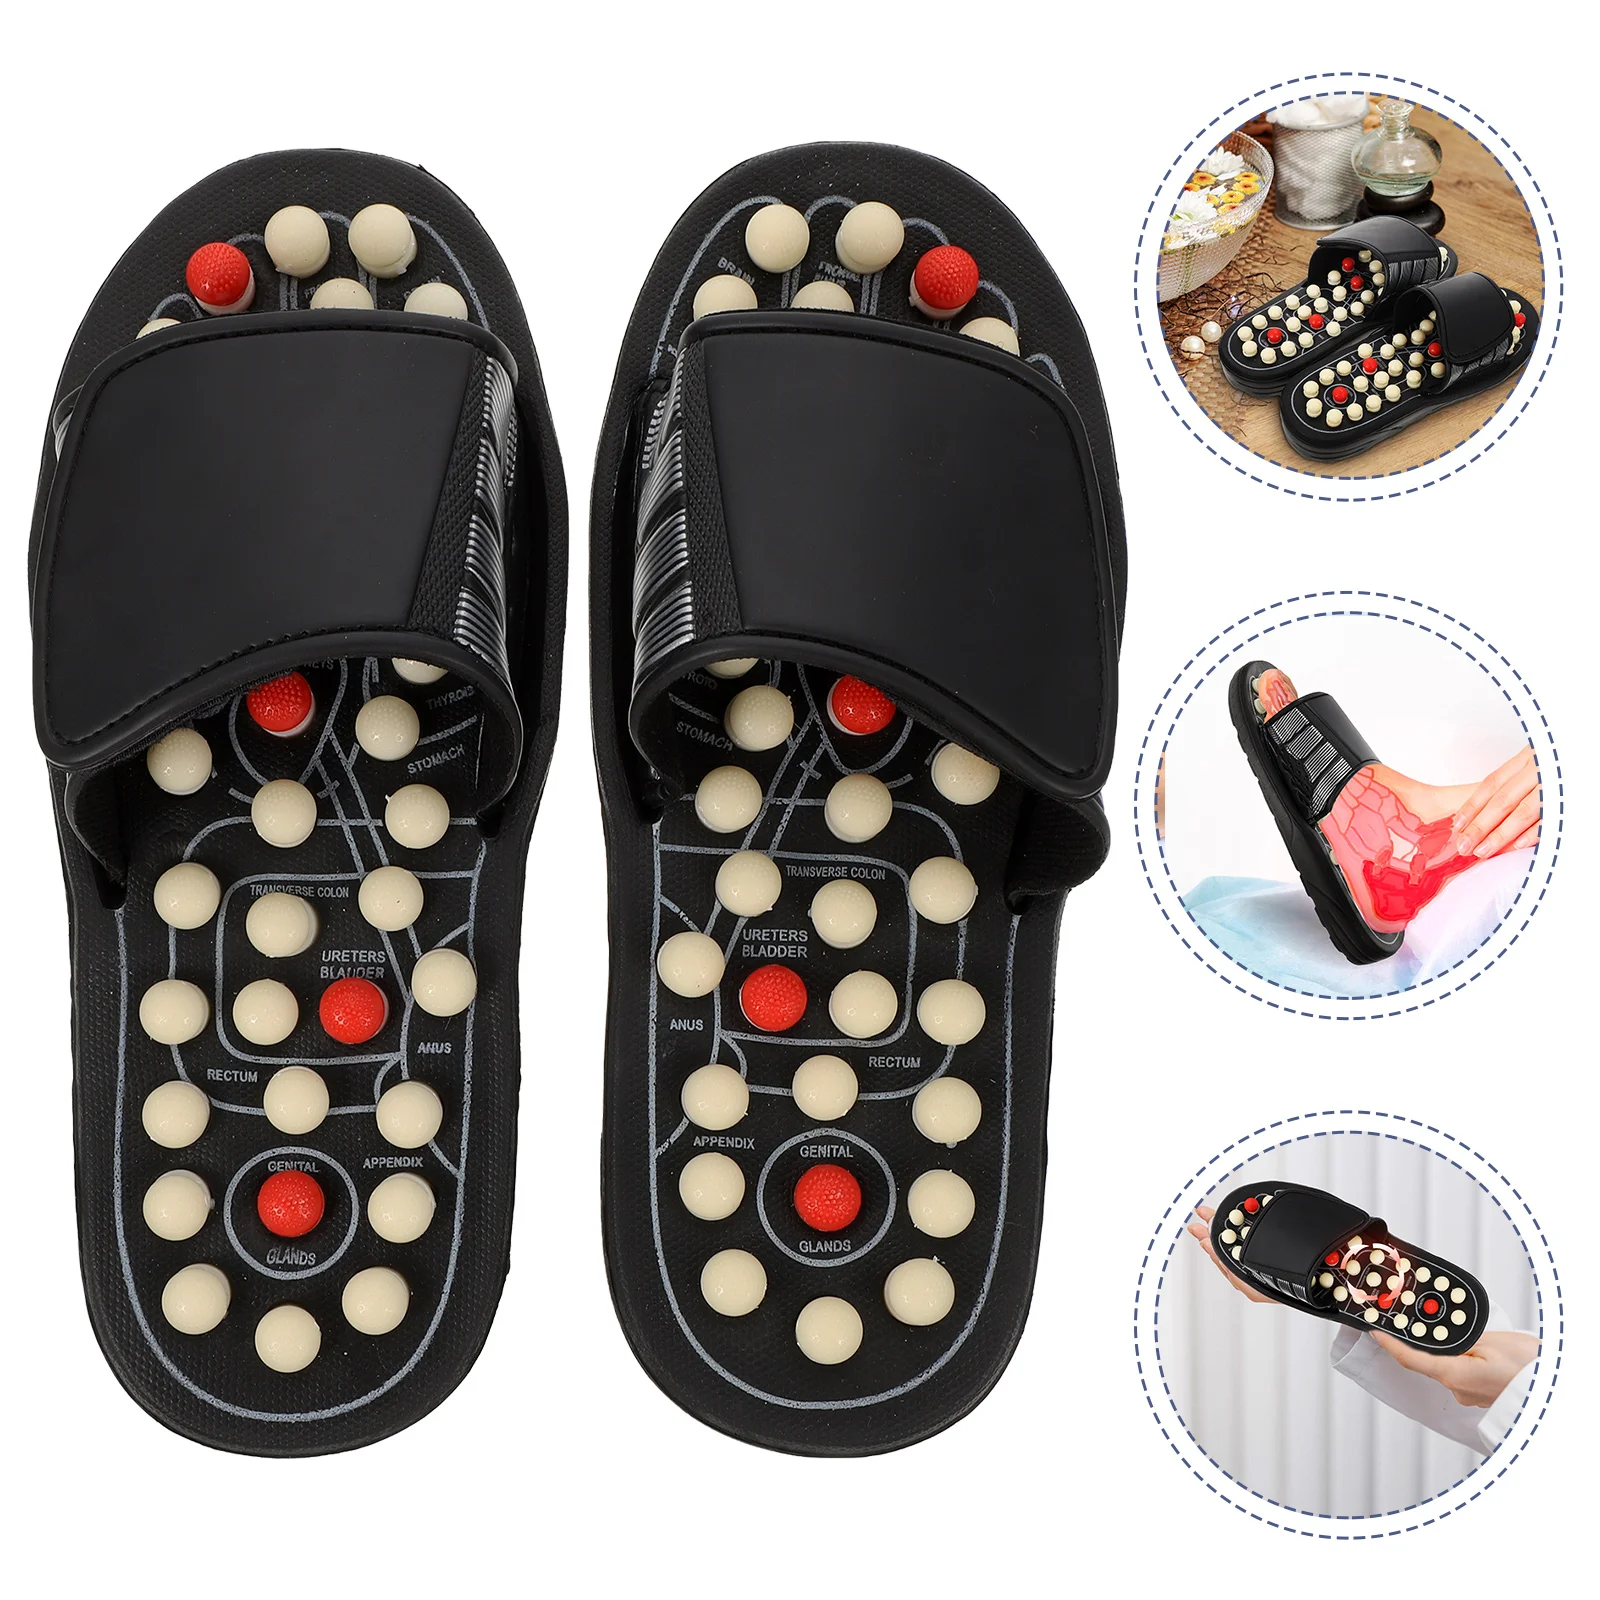 

Acupoint Massage Slippers Men's Foot Acupoint Massage Slipper Household Foot Slippers Acupressure